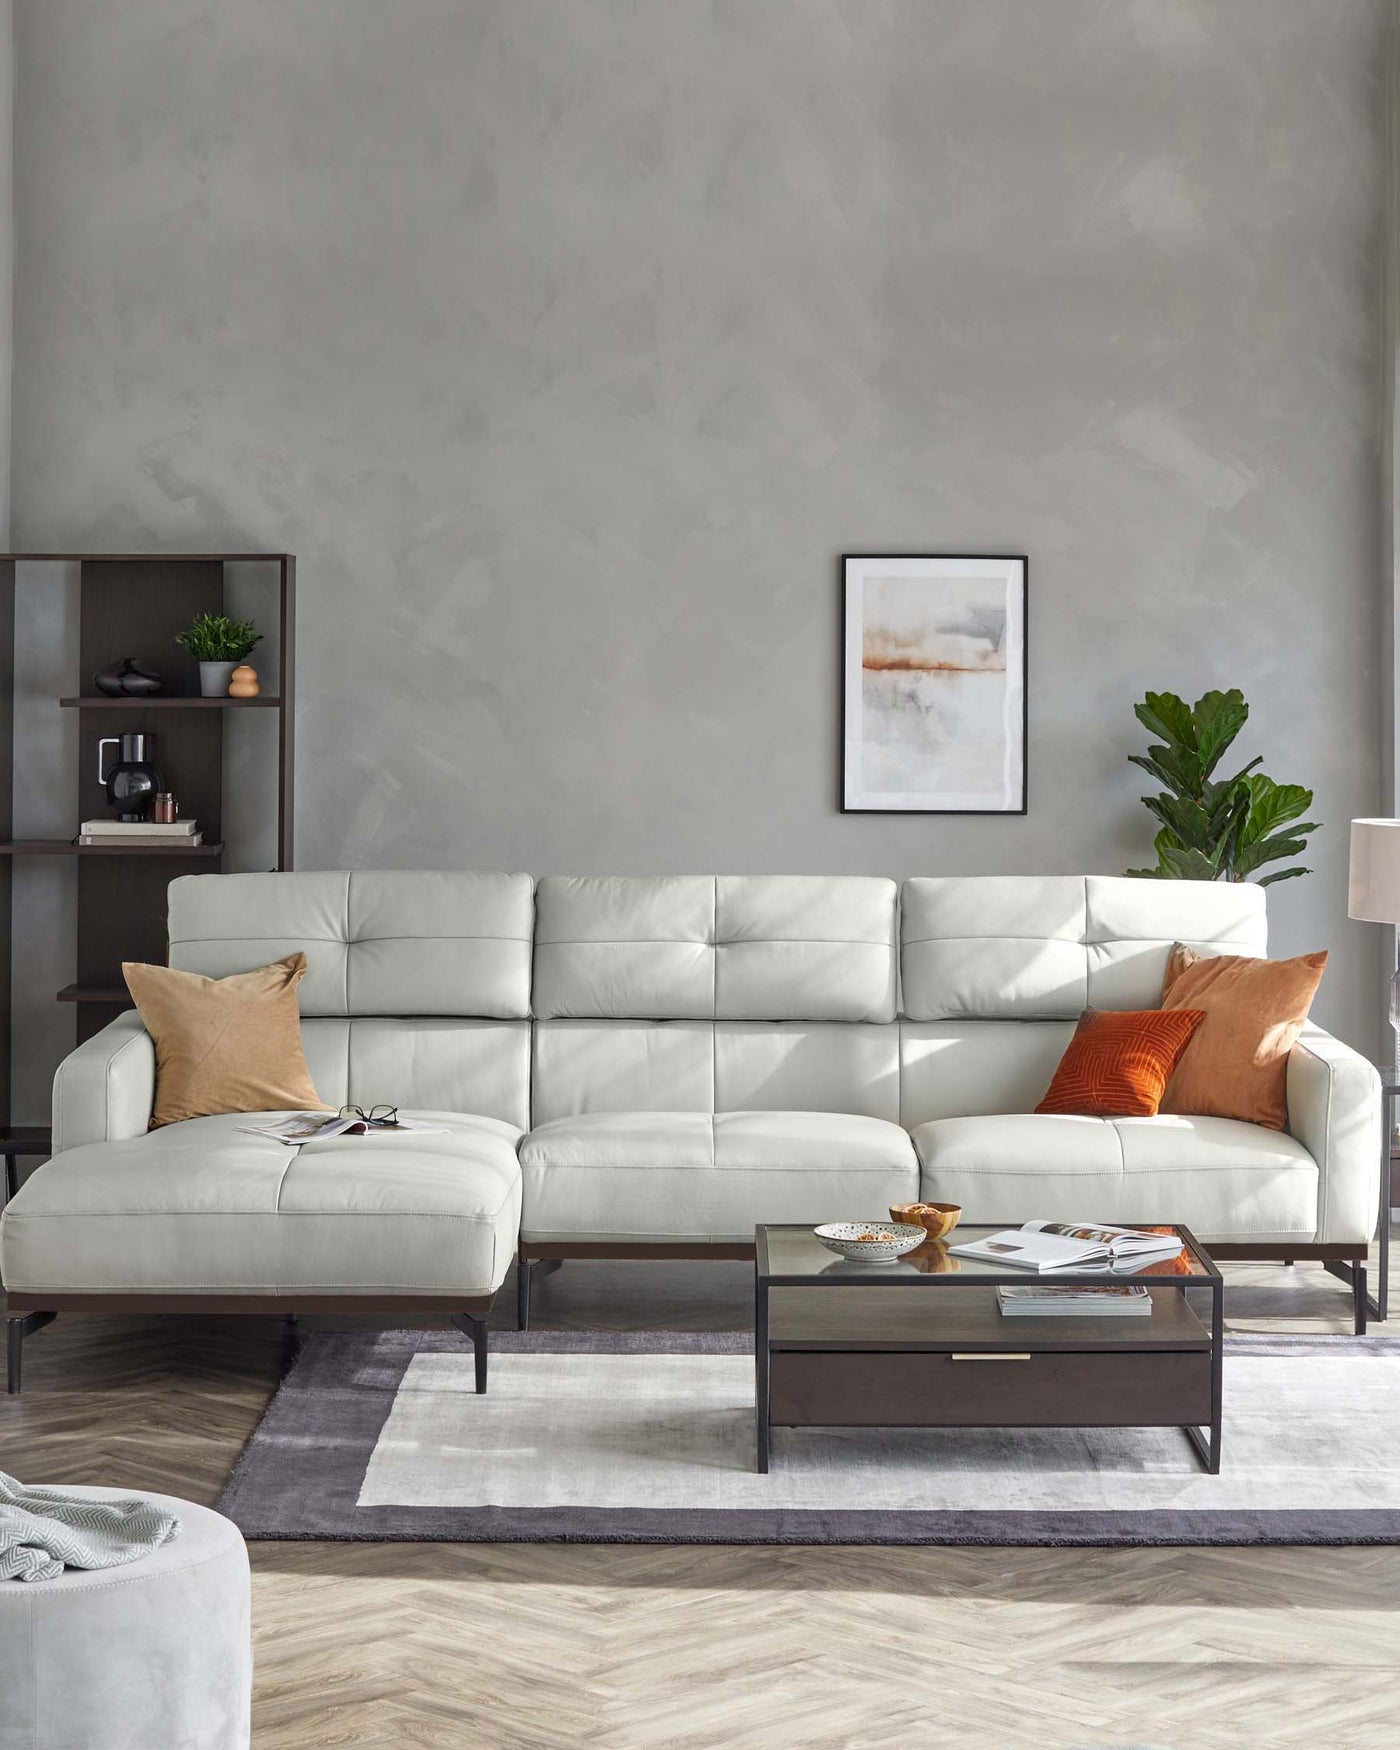 Modern living room setup featuring a sleek off-white L-shaped sectional sofa with tufted back cushions, accented with contrasting orange and beige throw pillows. In front of the sofa is a rectangular dark wood coffee table with a glossy finish and an open shelf, displaying decorative items and books. To the left, a minimalist dark wood shelving unit showcases sparse decorative pieces, enhancing the clean, contemporary aesthetic of the space.